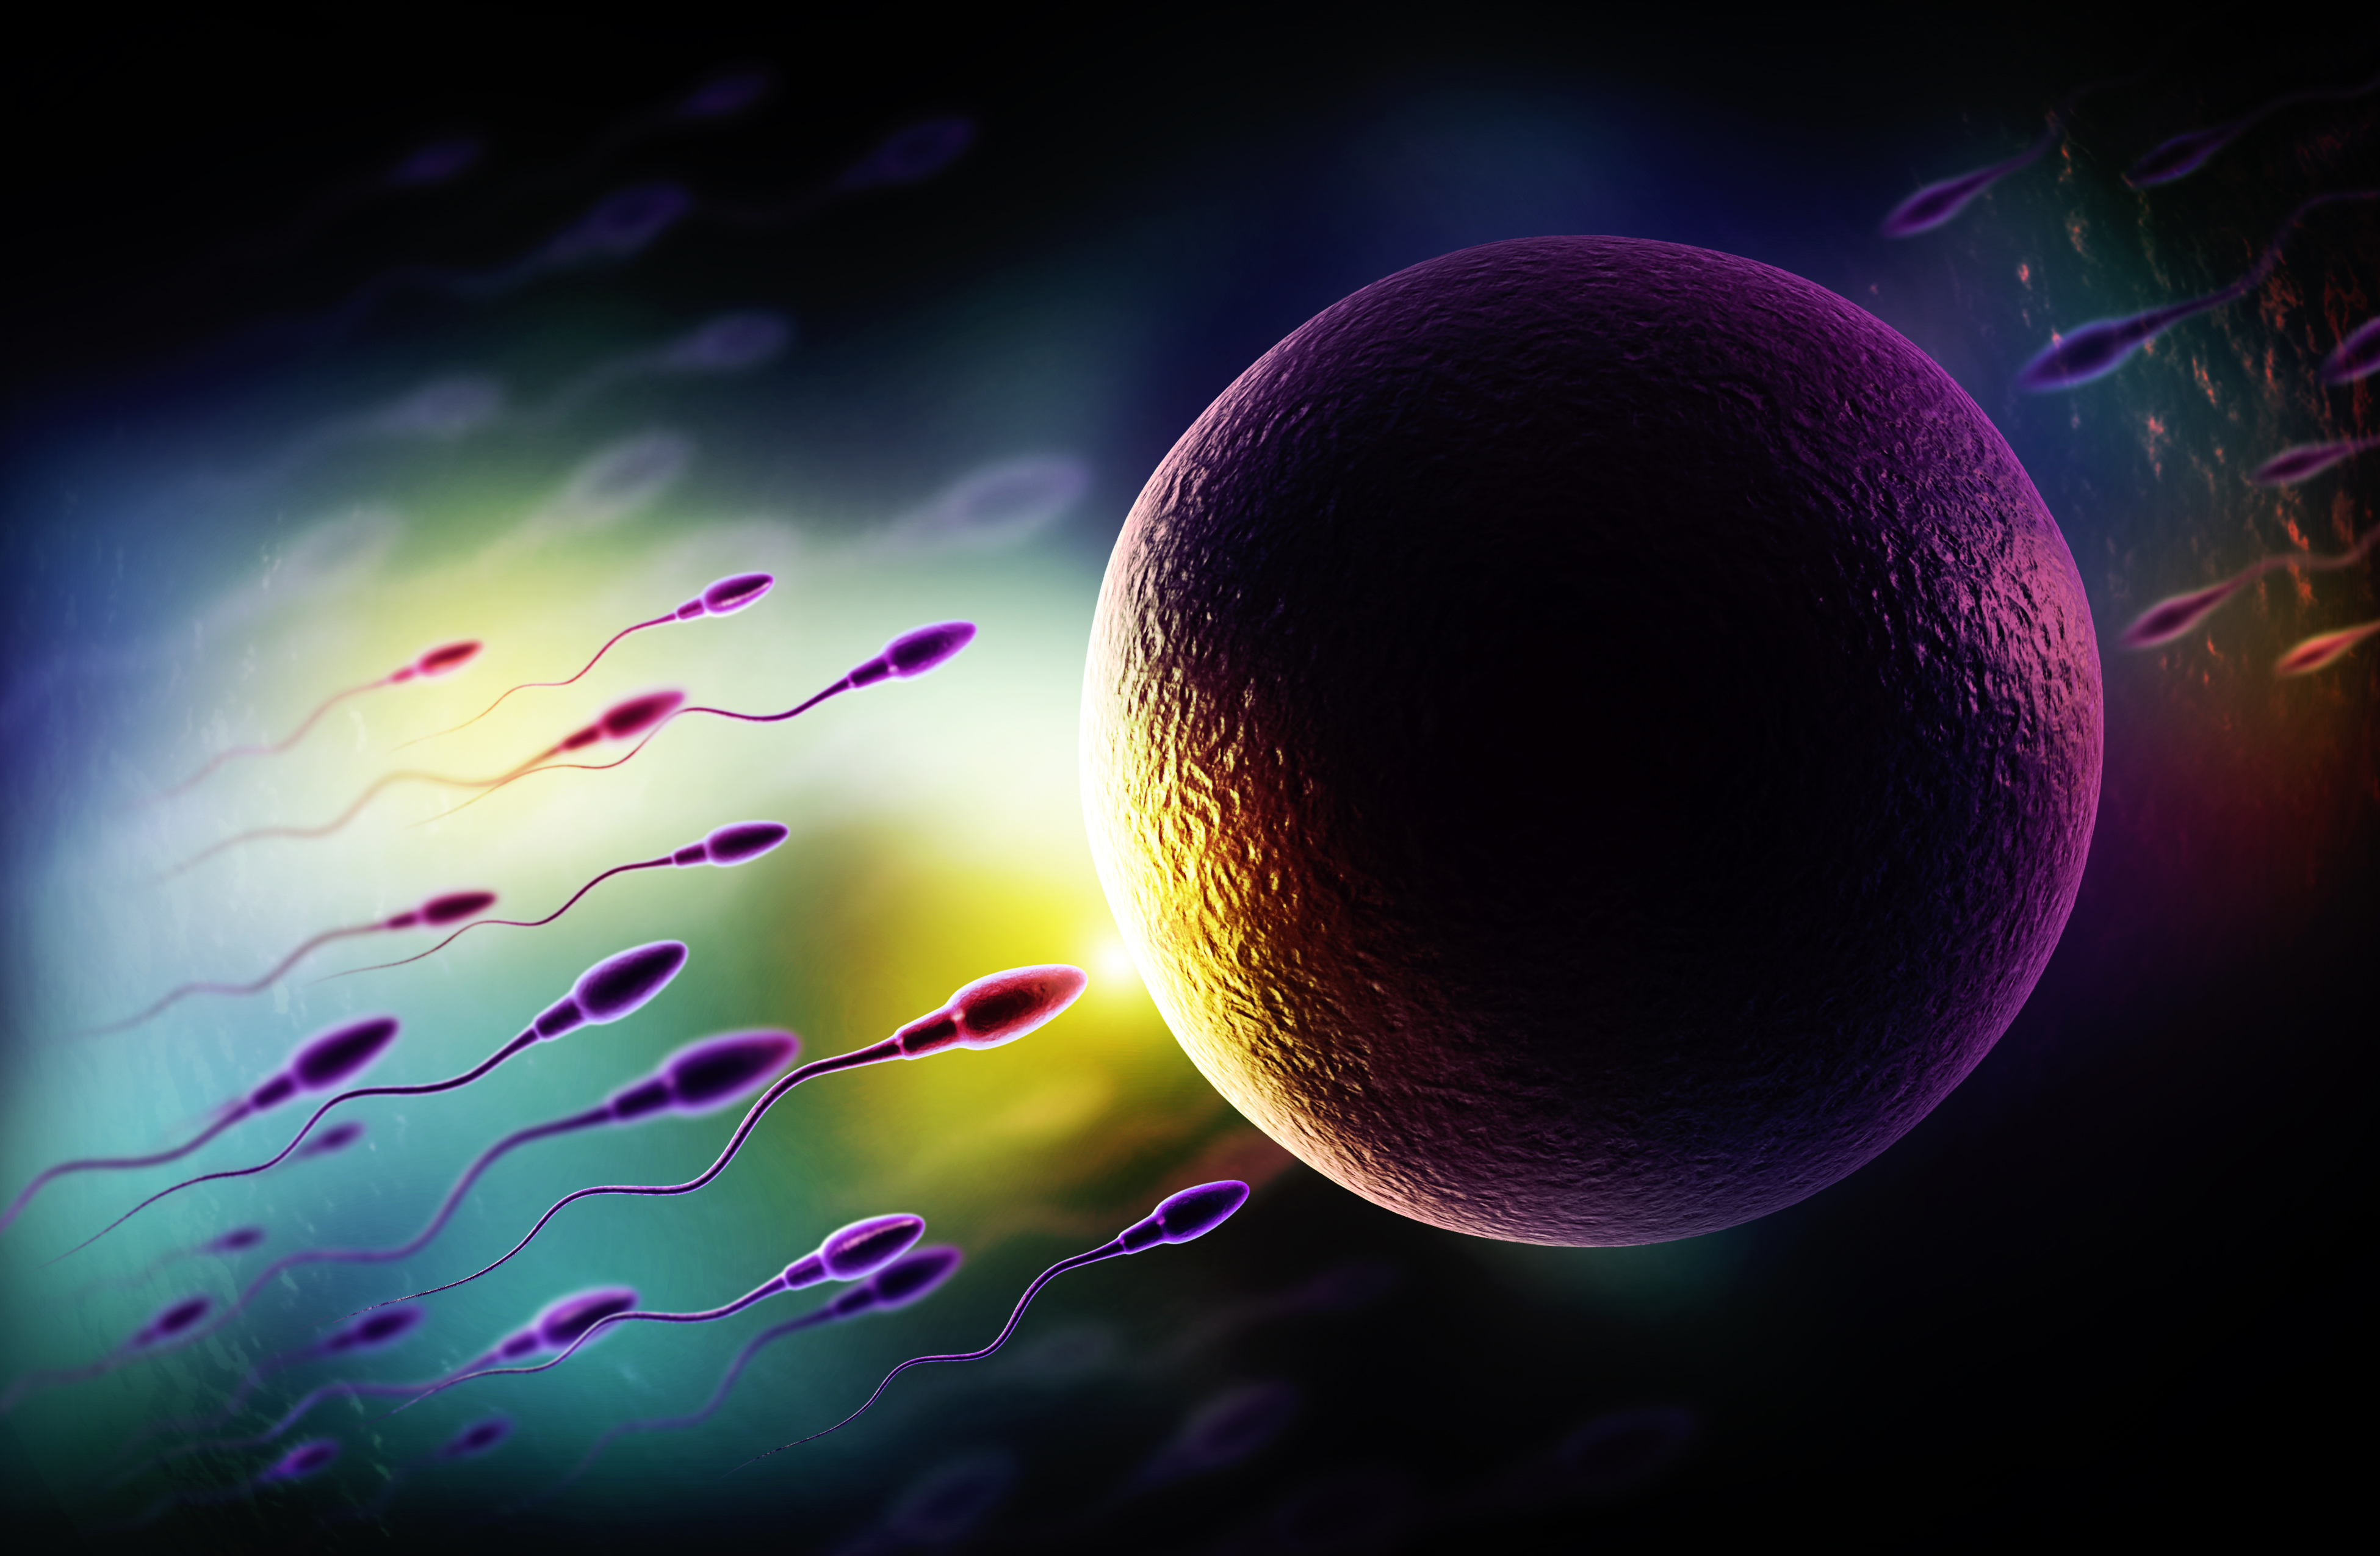 Course Image Is he really Infertile? Let's talk about sperm